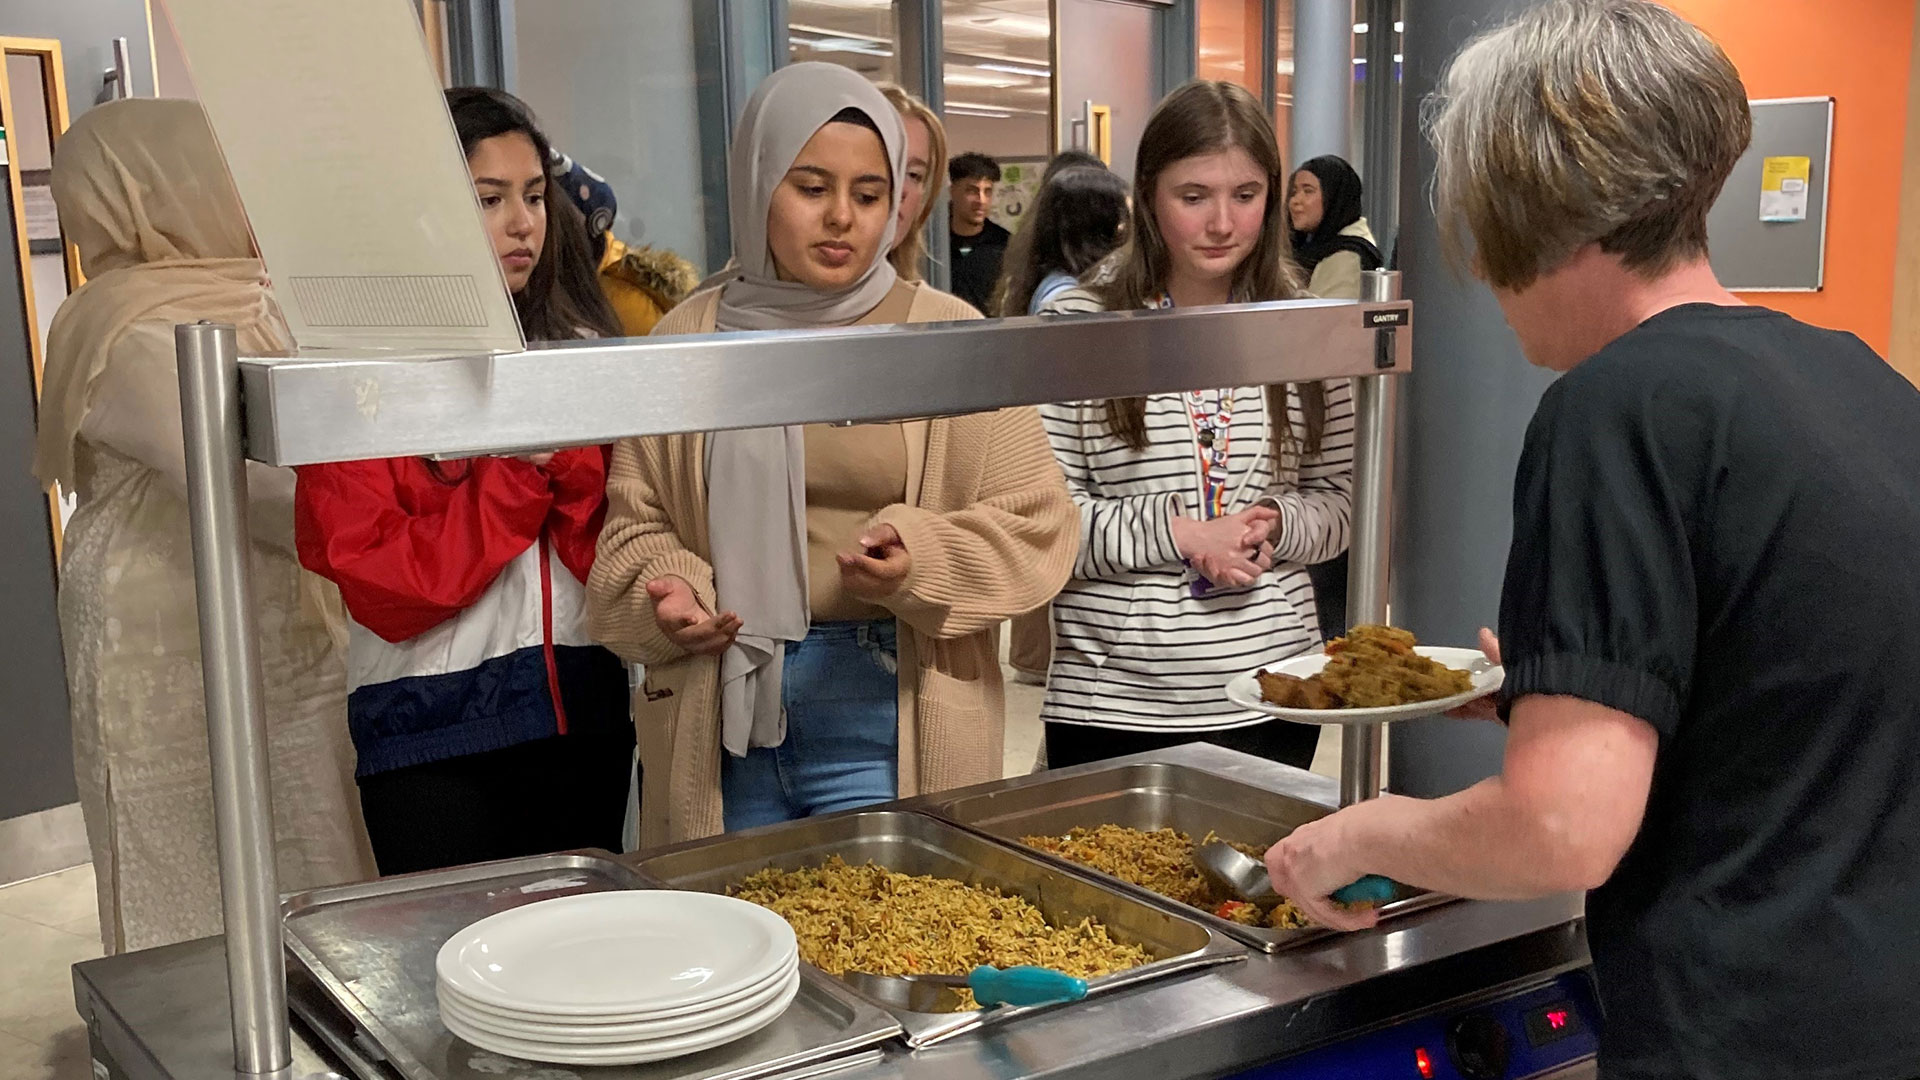 A group of students including a Muslim student purchase food.